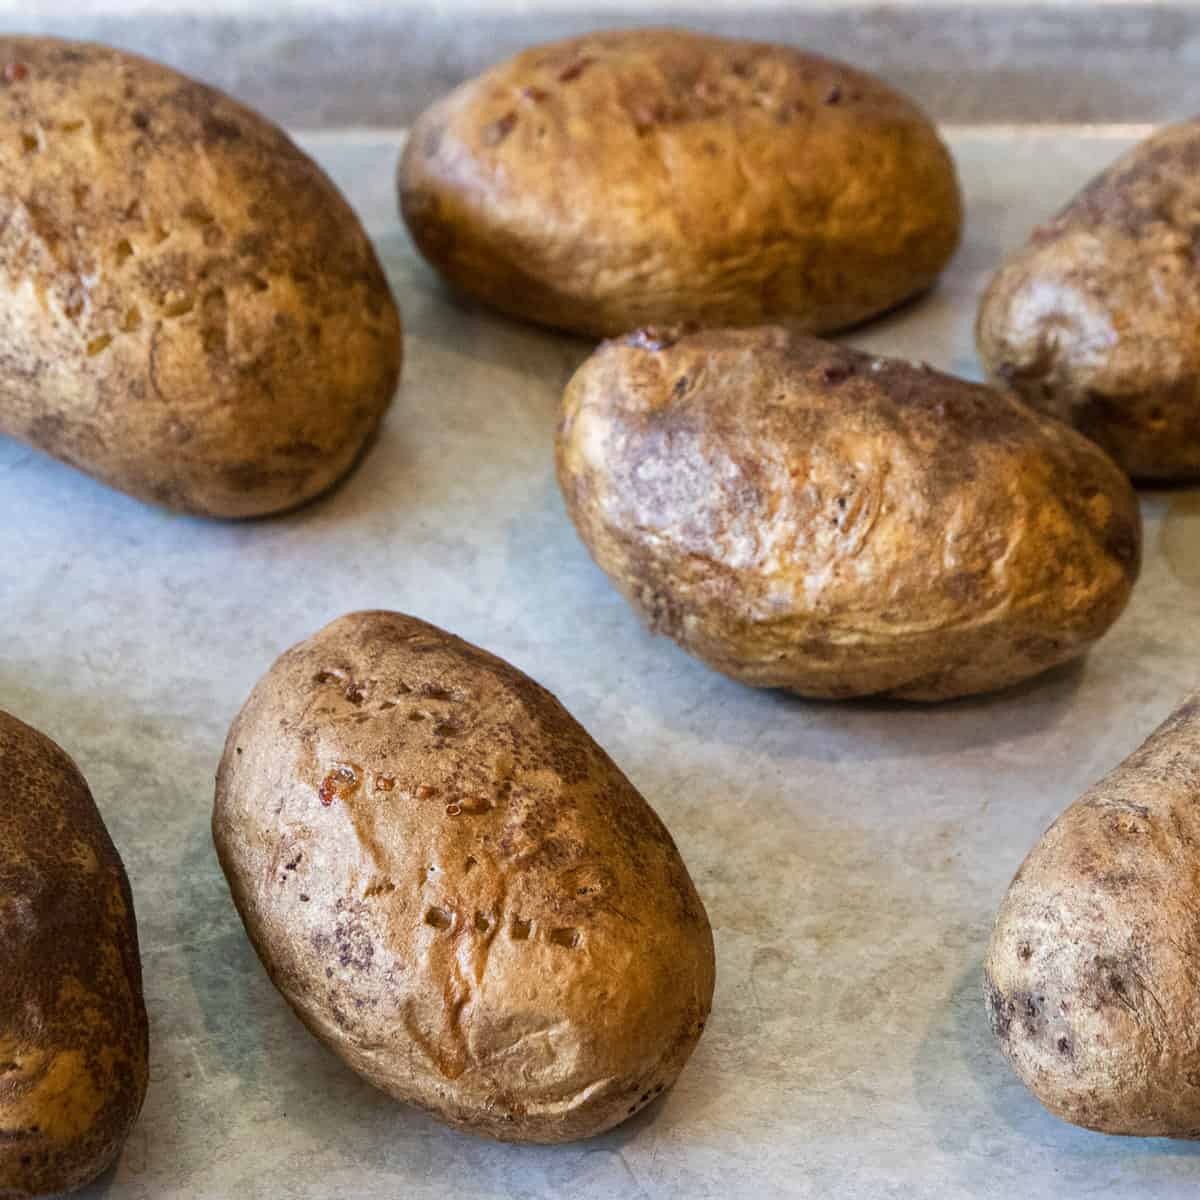 Rub olive oil on the potatoes, then bake the potatoes in the oven at four hundred degrees Fahrenheit for one hour.